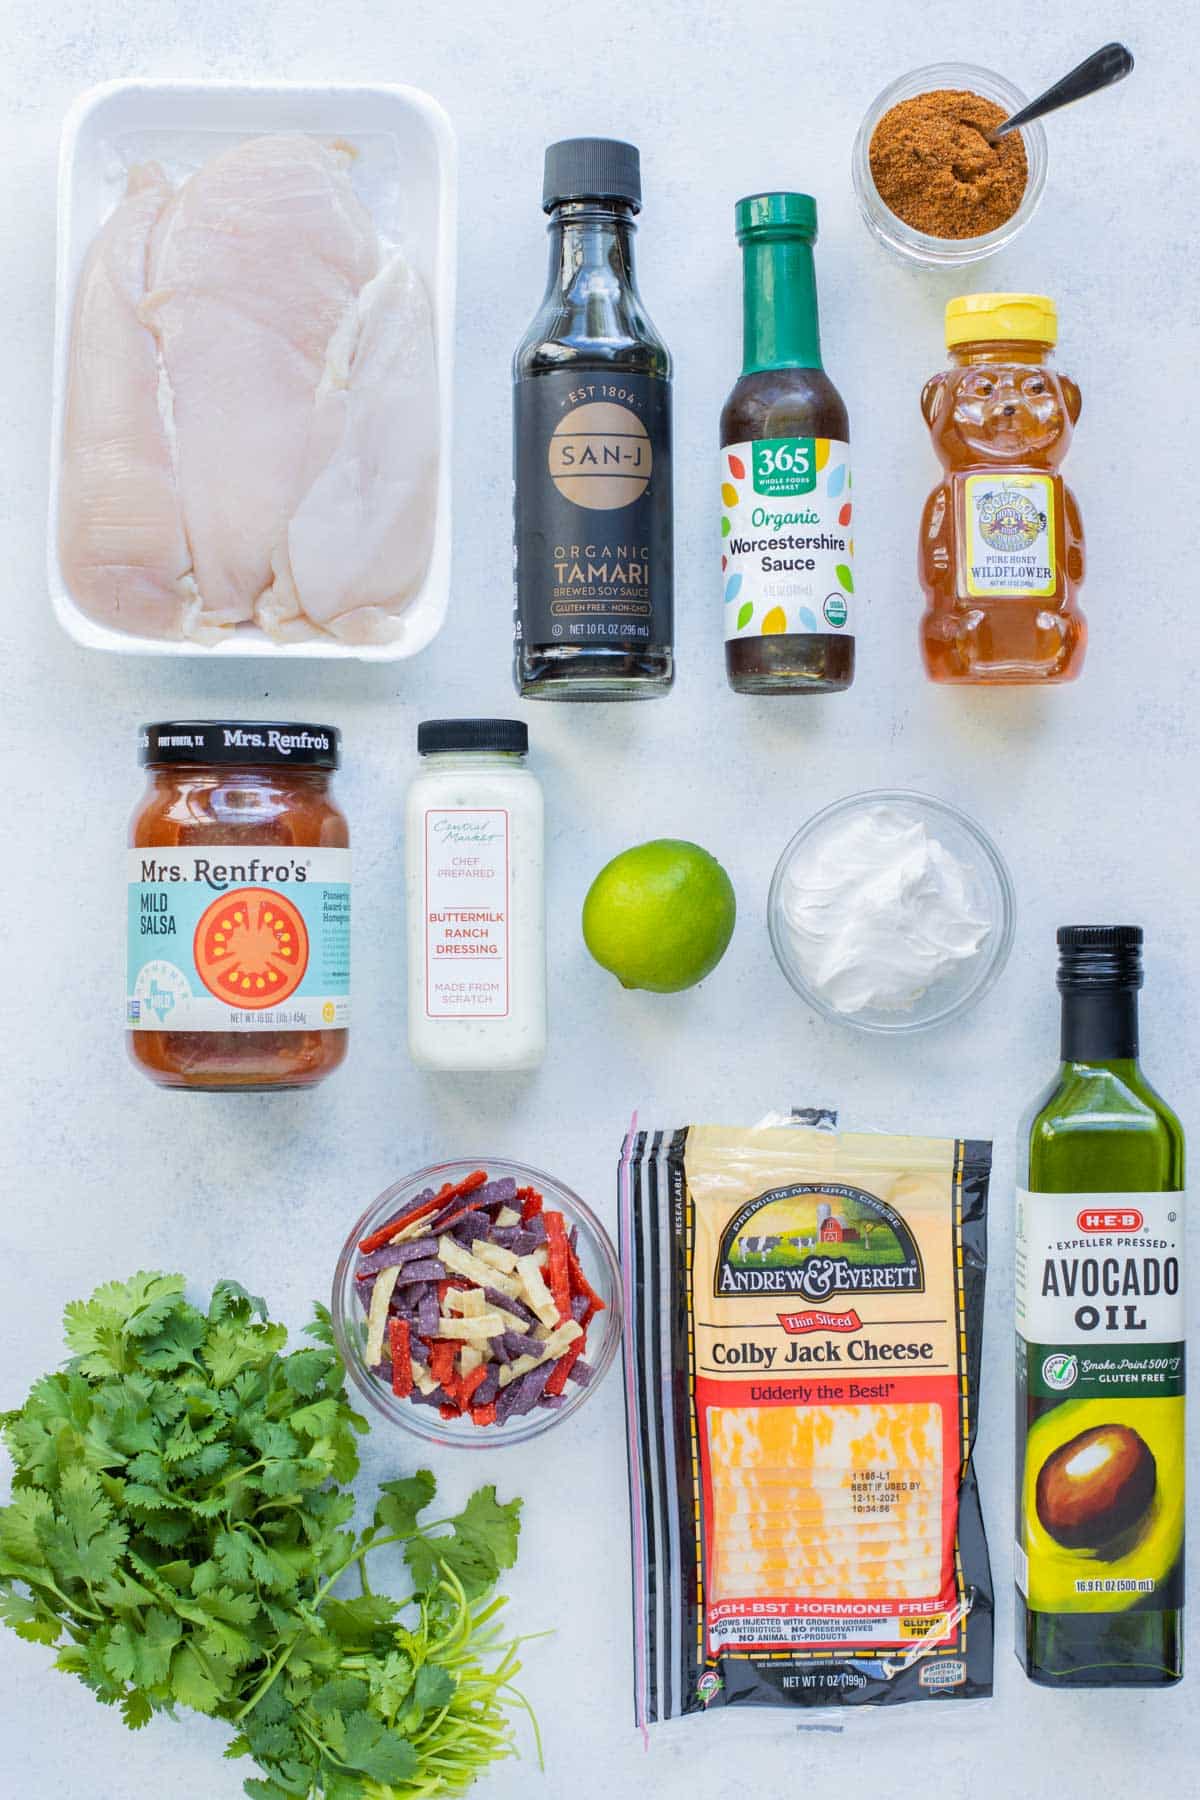 Honey, chicken, salsa, lime juice, oil, sour cream, cilantro, salsa, cheese, and tortilla chips are the ingredients for this recipe.